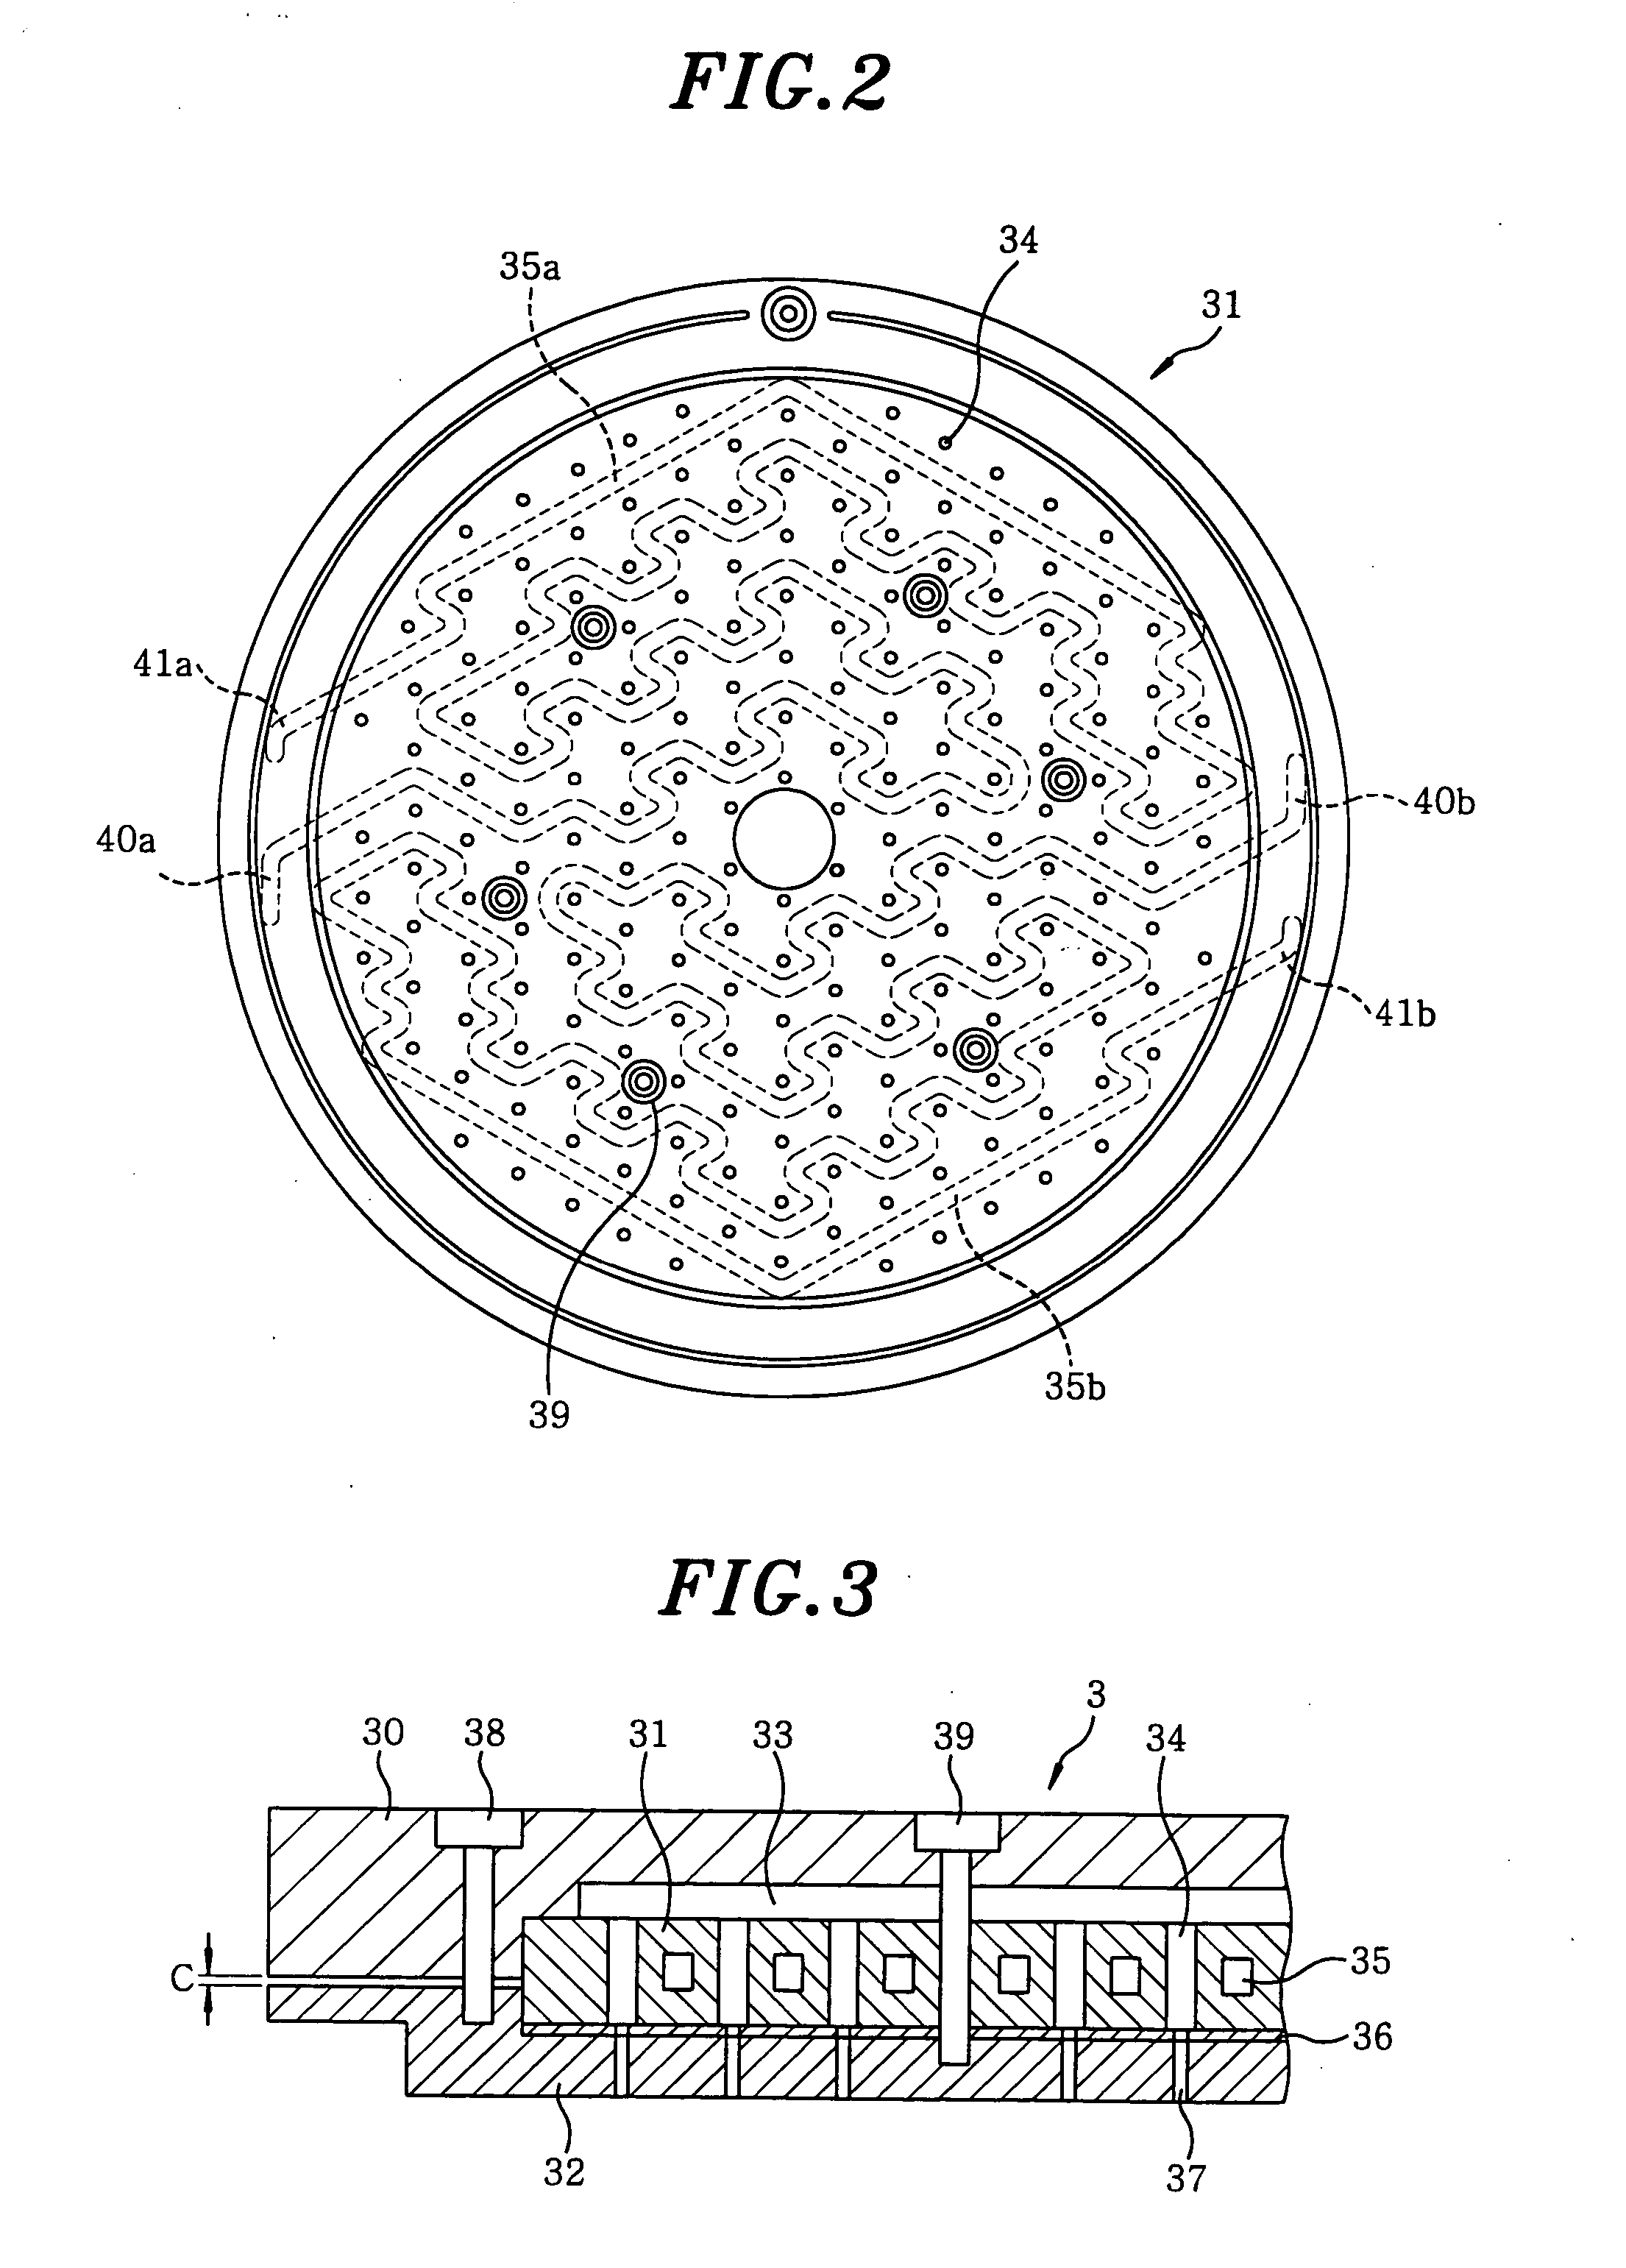 Upper electrode and plasma processing apparatus